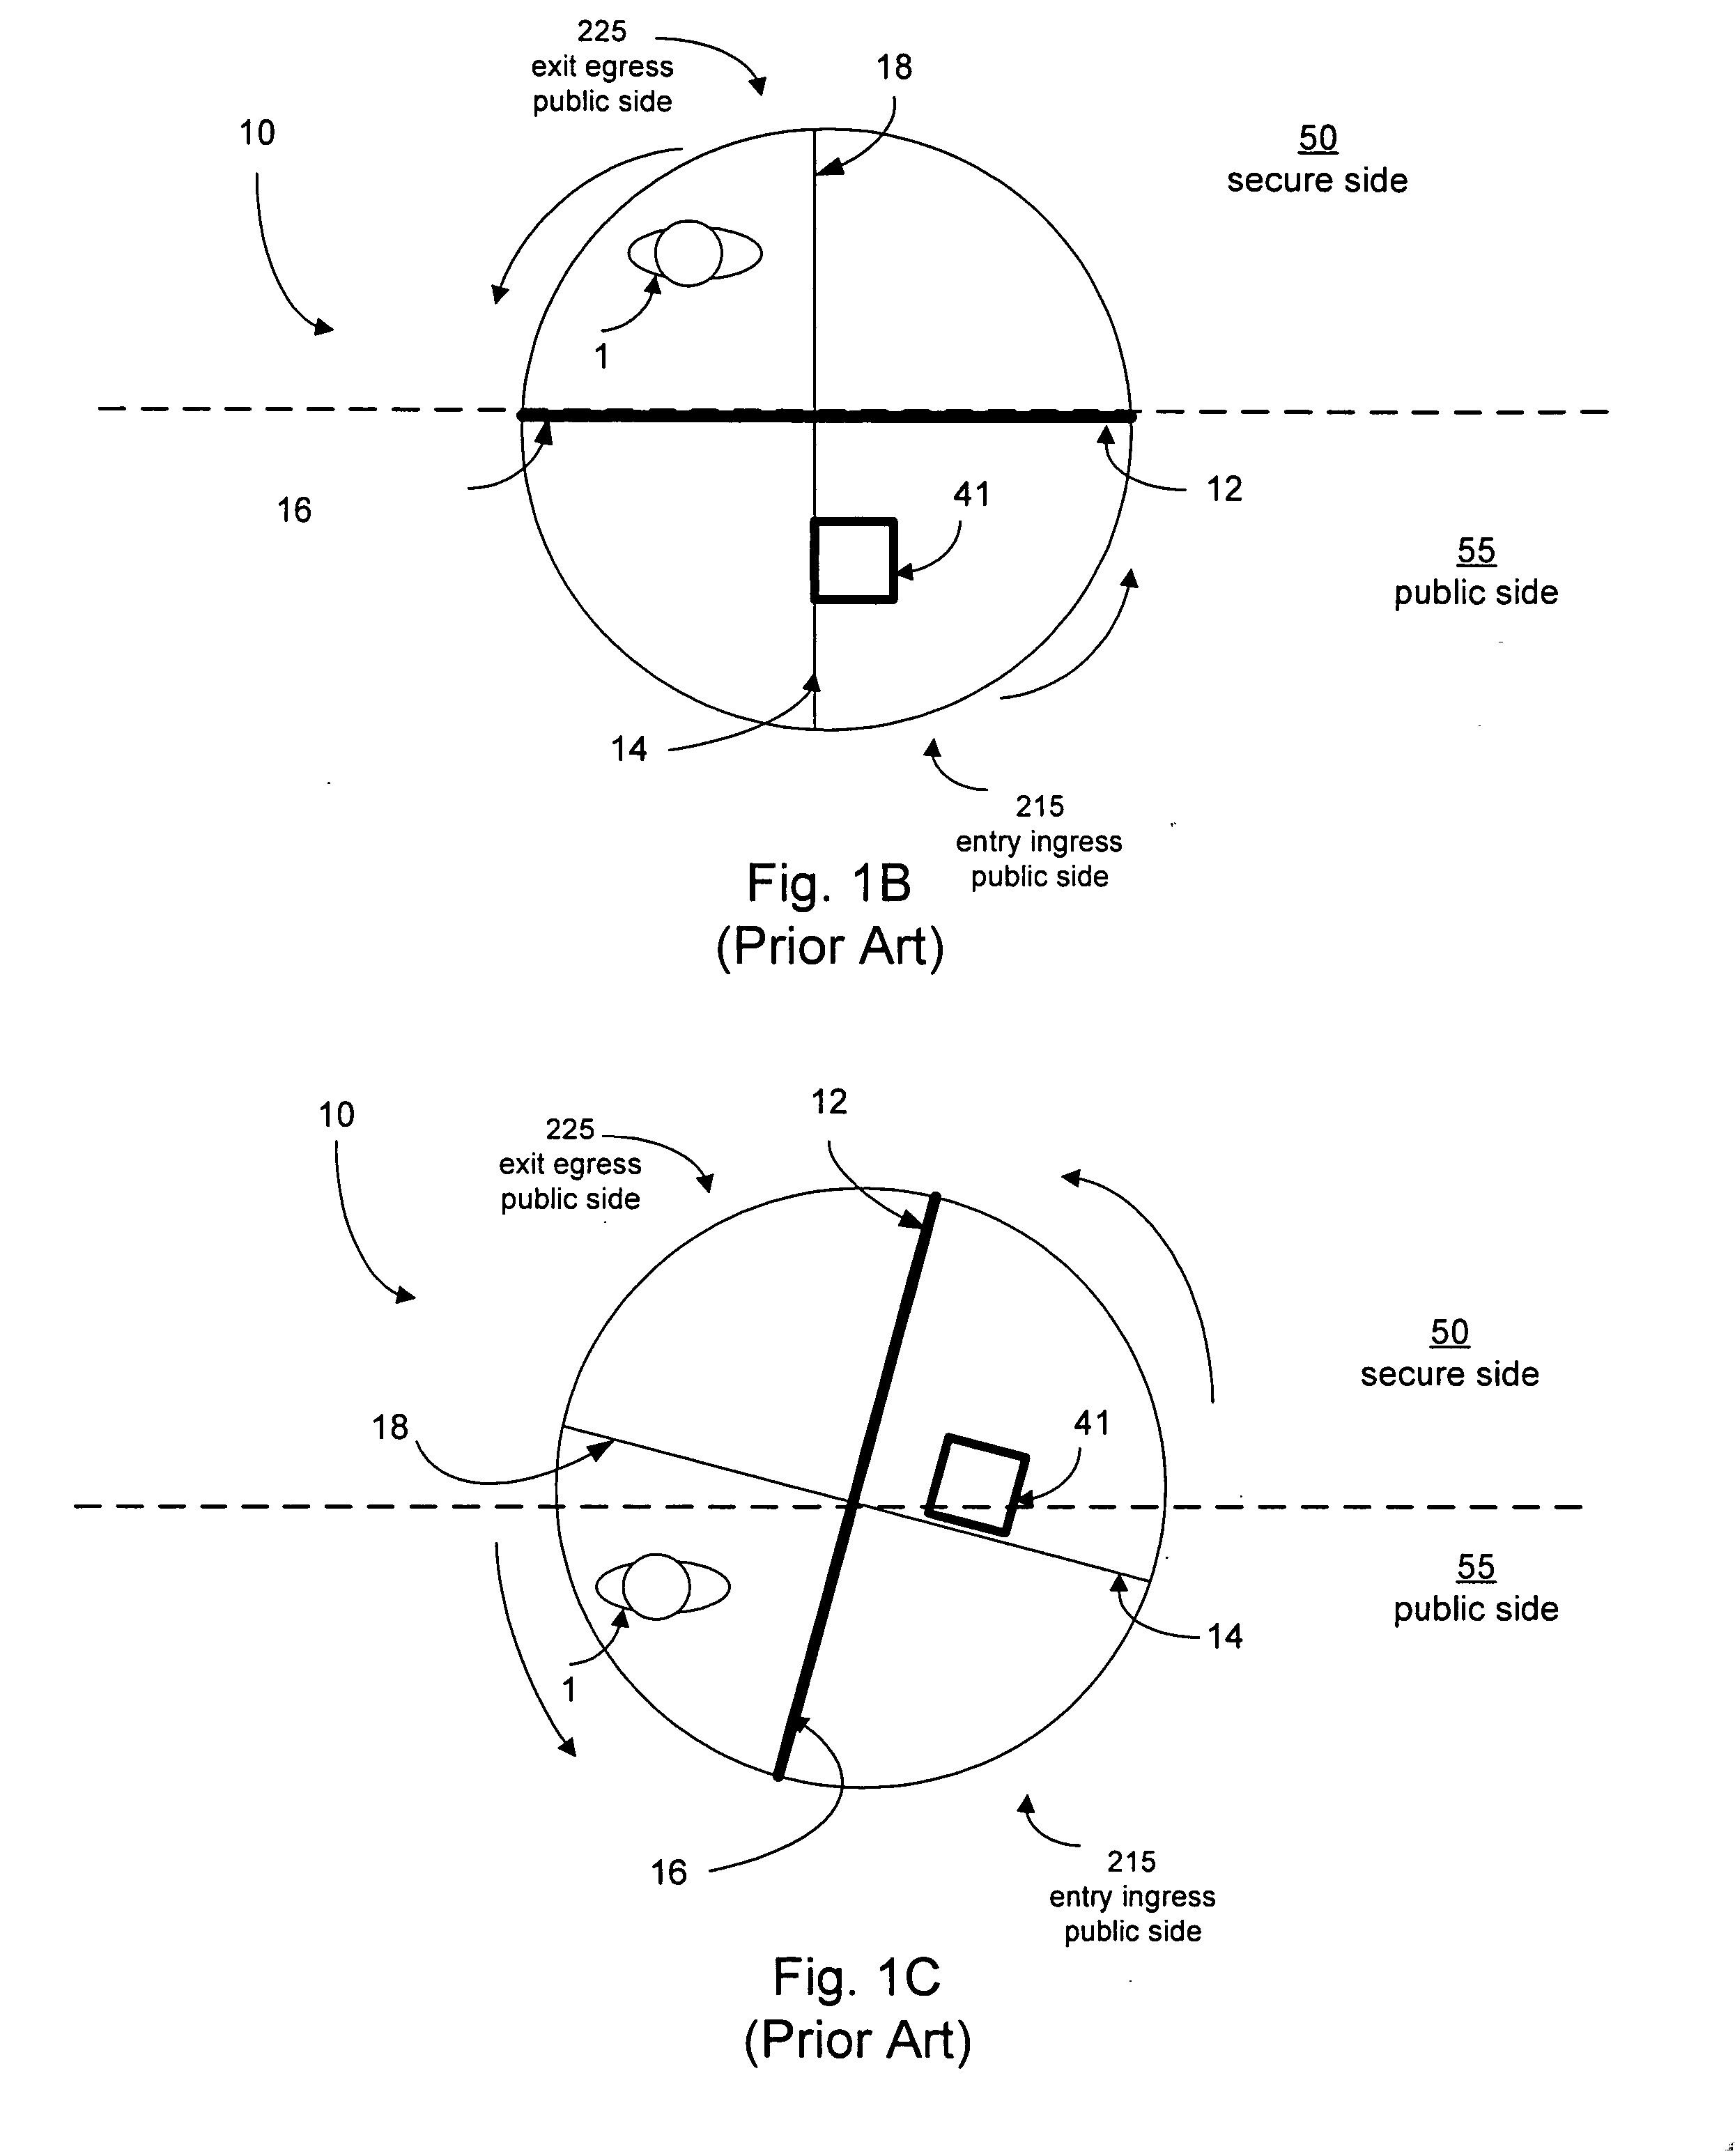 Method and apparatus for detecting non-people objects in revolving doors